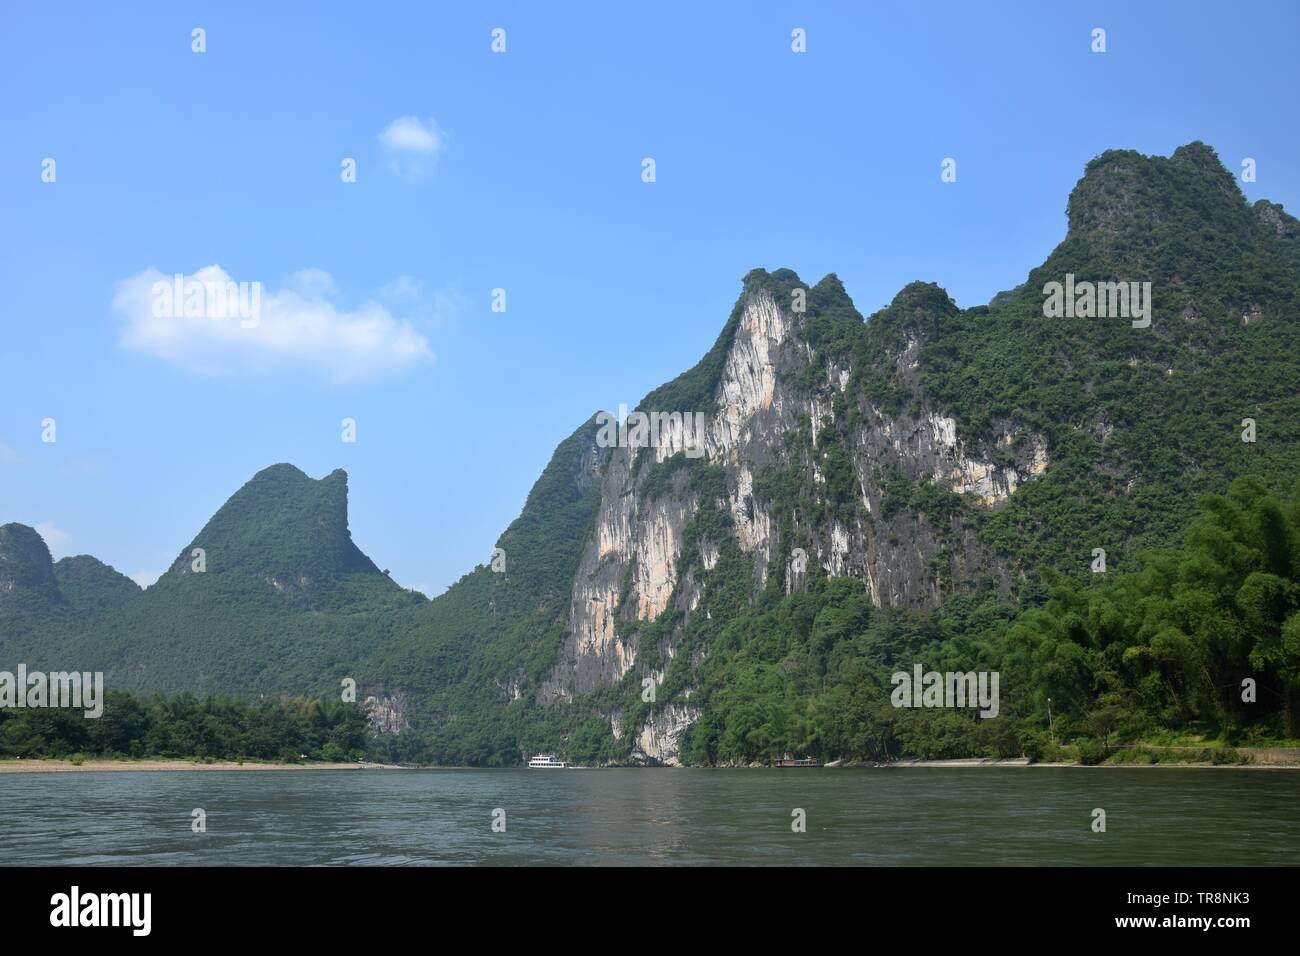 The area around small town Yangshuo in Guangxi Zhuang Autonomous Region in China is renowned for its karst landscape. Stock Photo